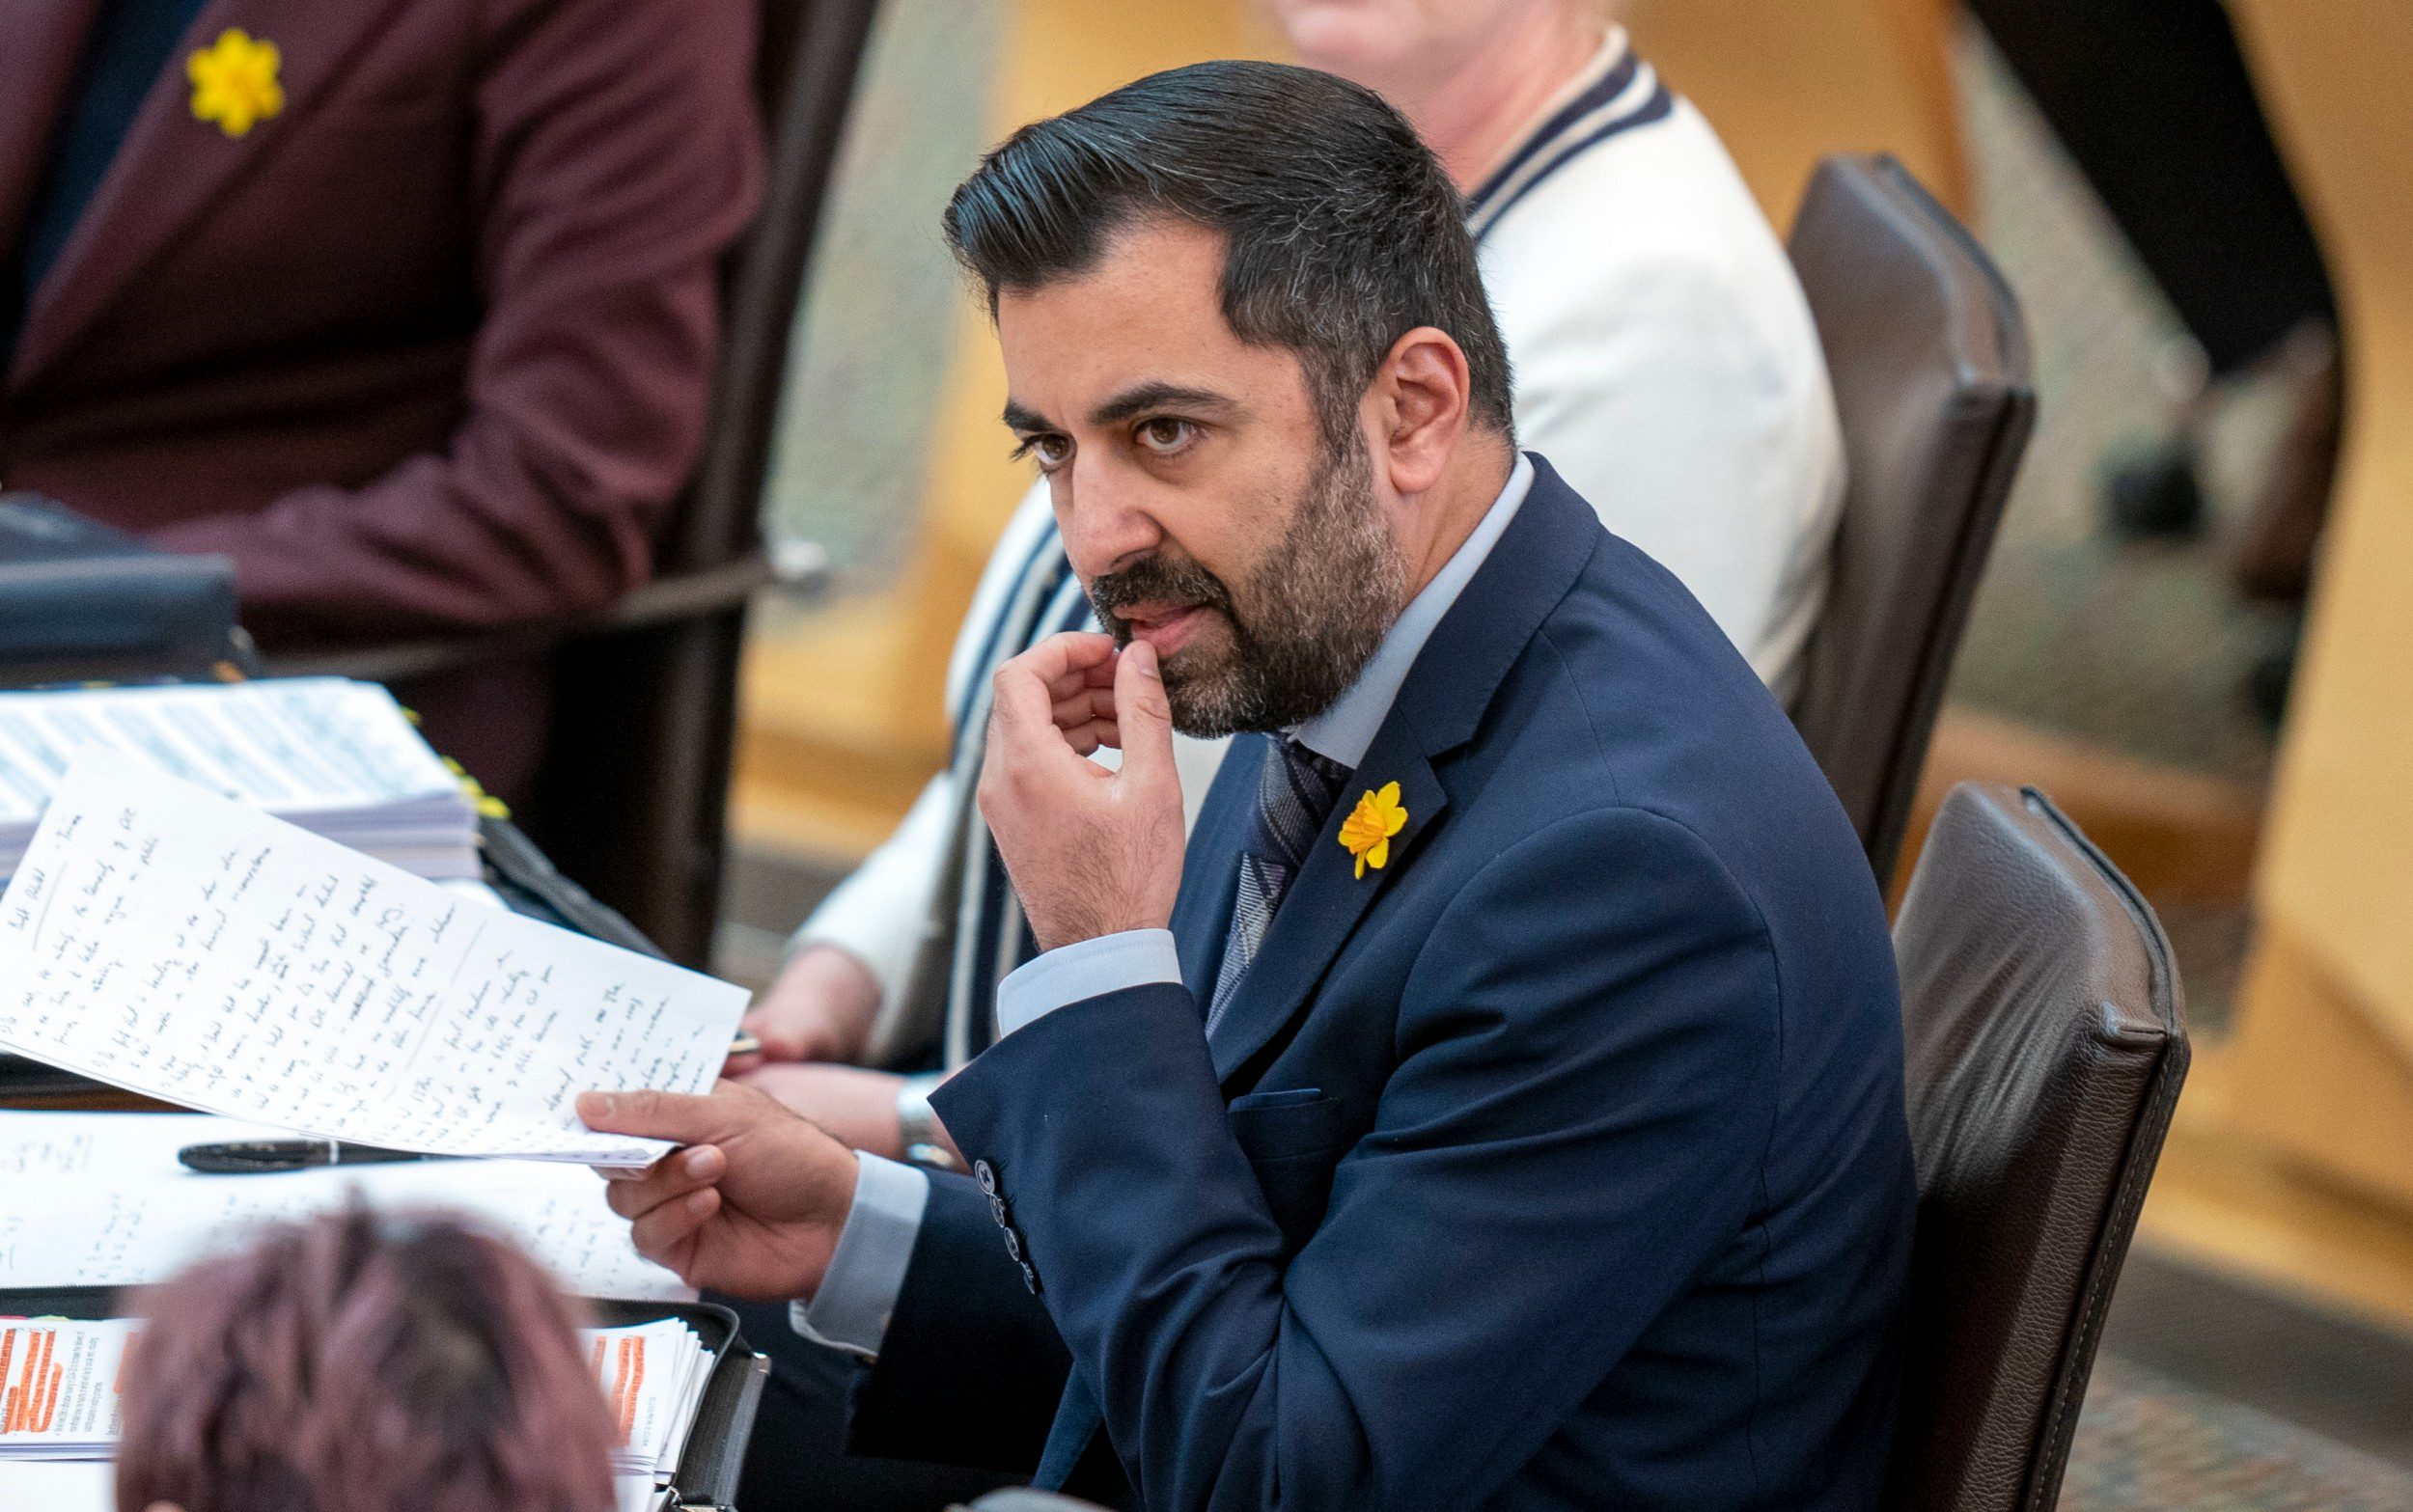 humza yousaf ‘gaslighting’ scotland by claiming he is tackling poverty, homeless charity says